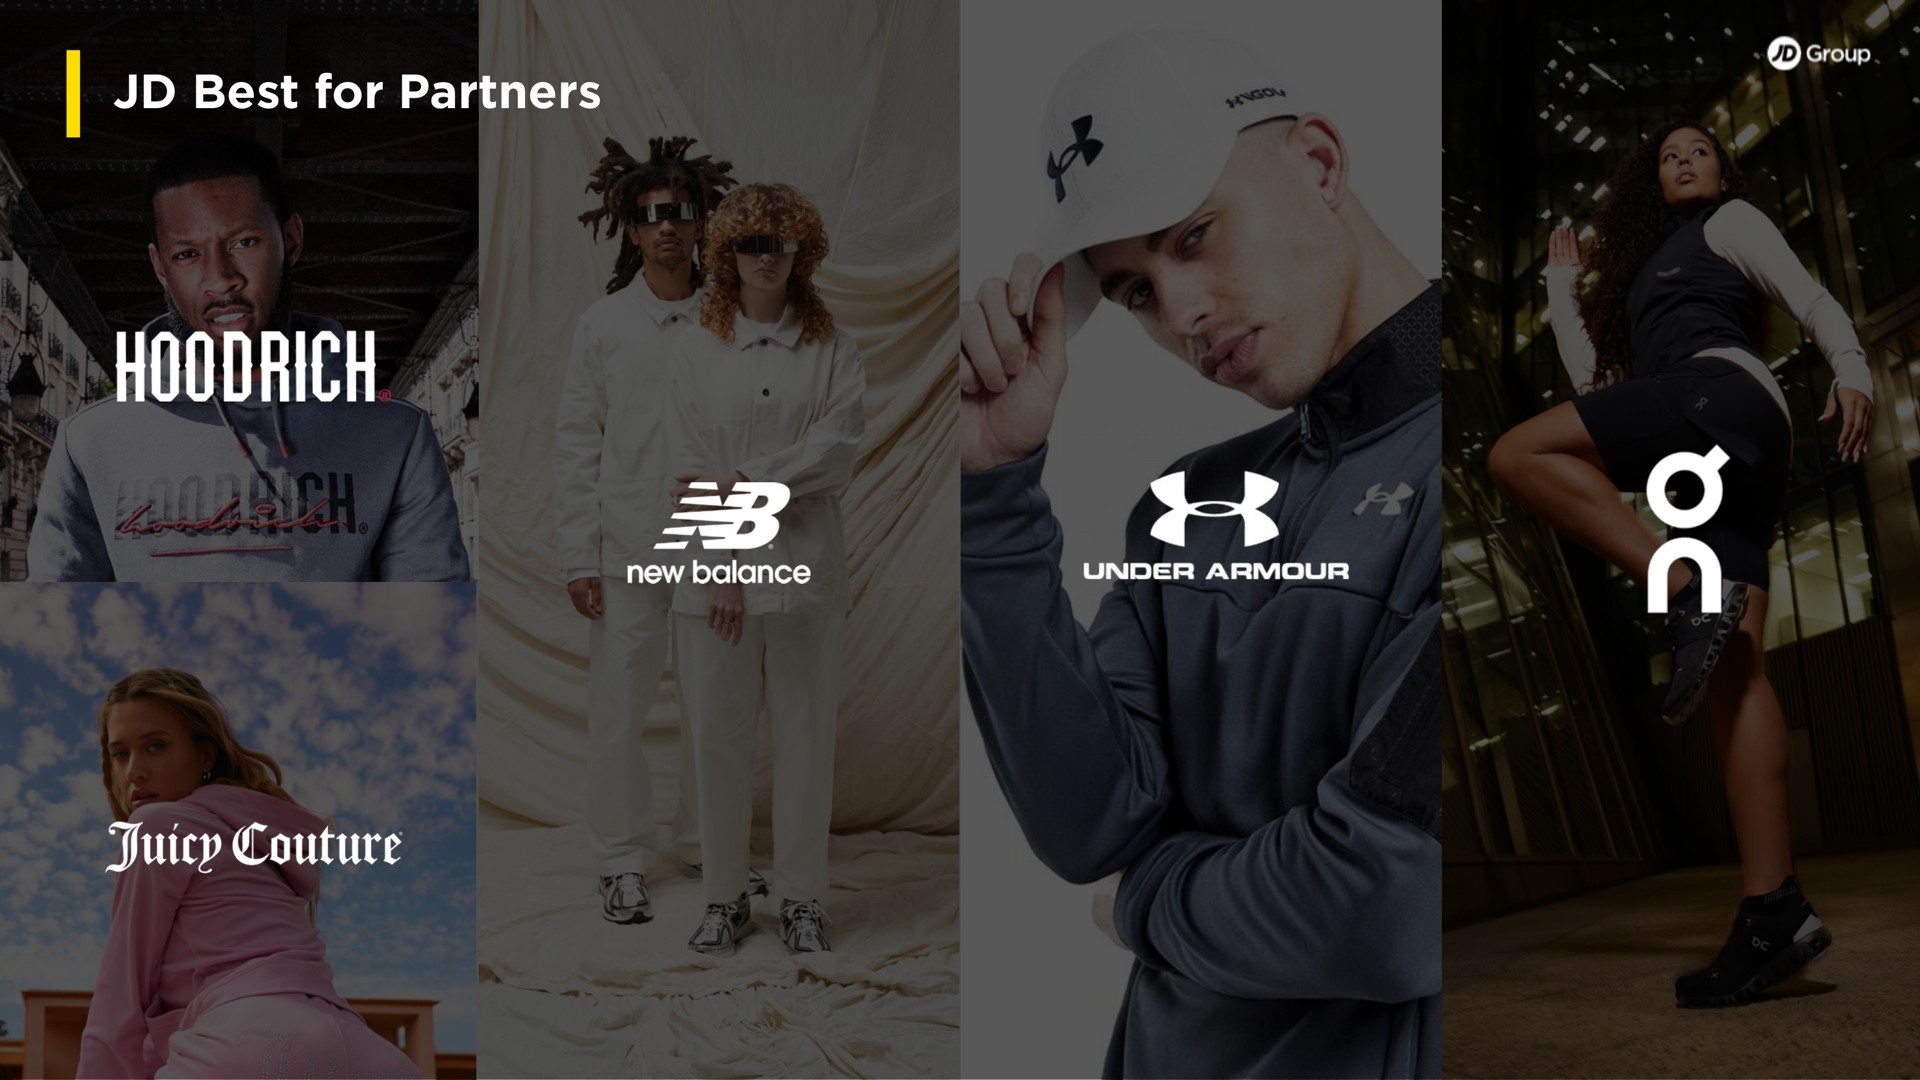 best for partners | JD Sports